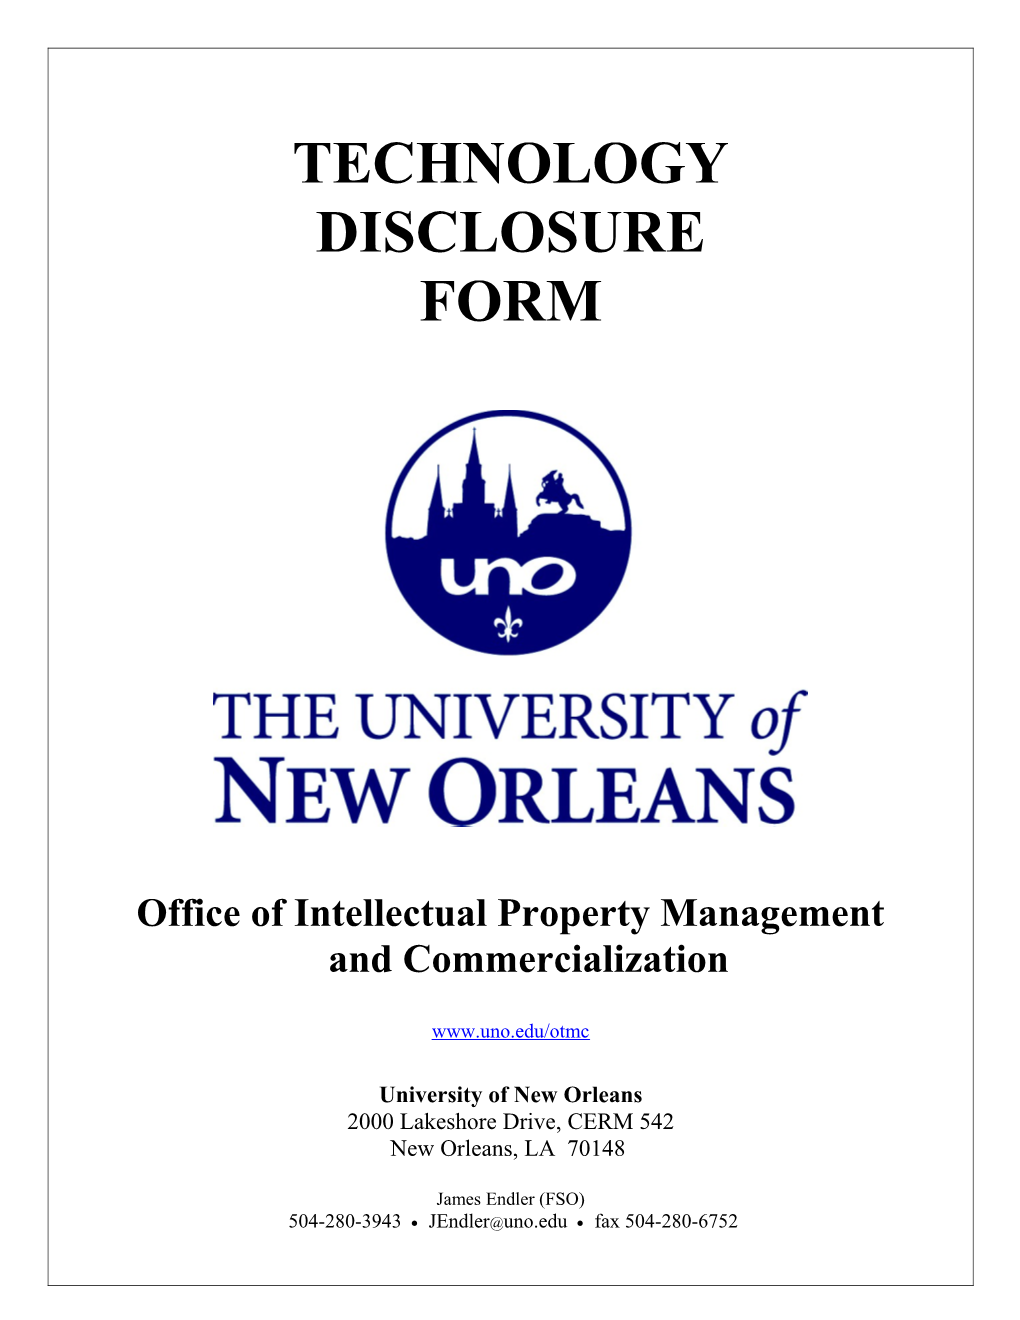 Office of Intellectual Property Management and Commercialization